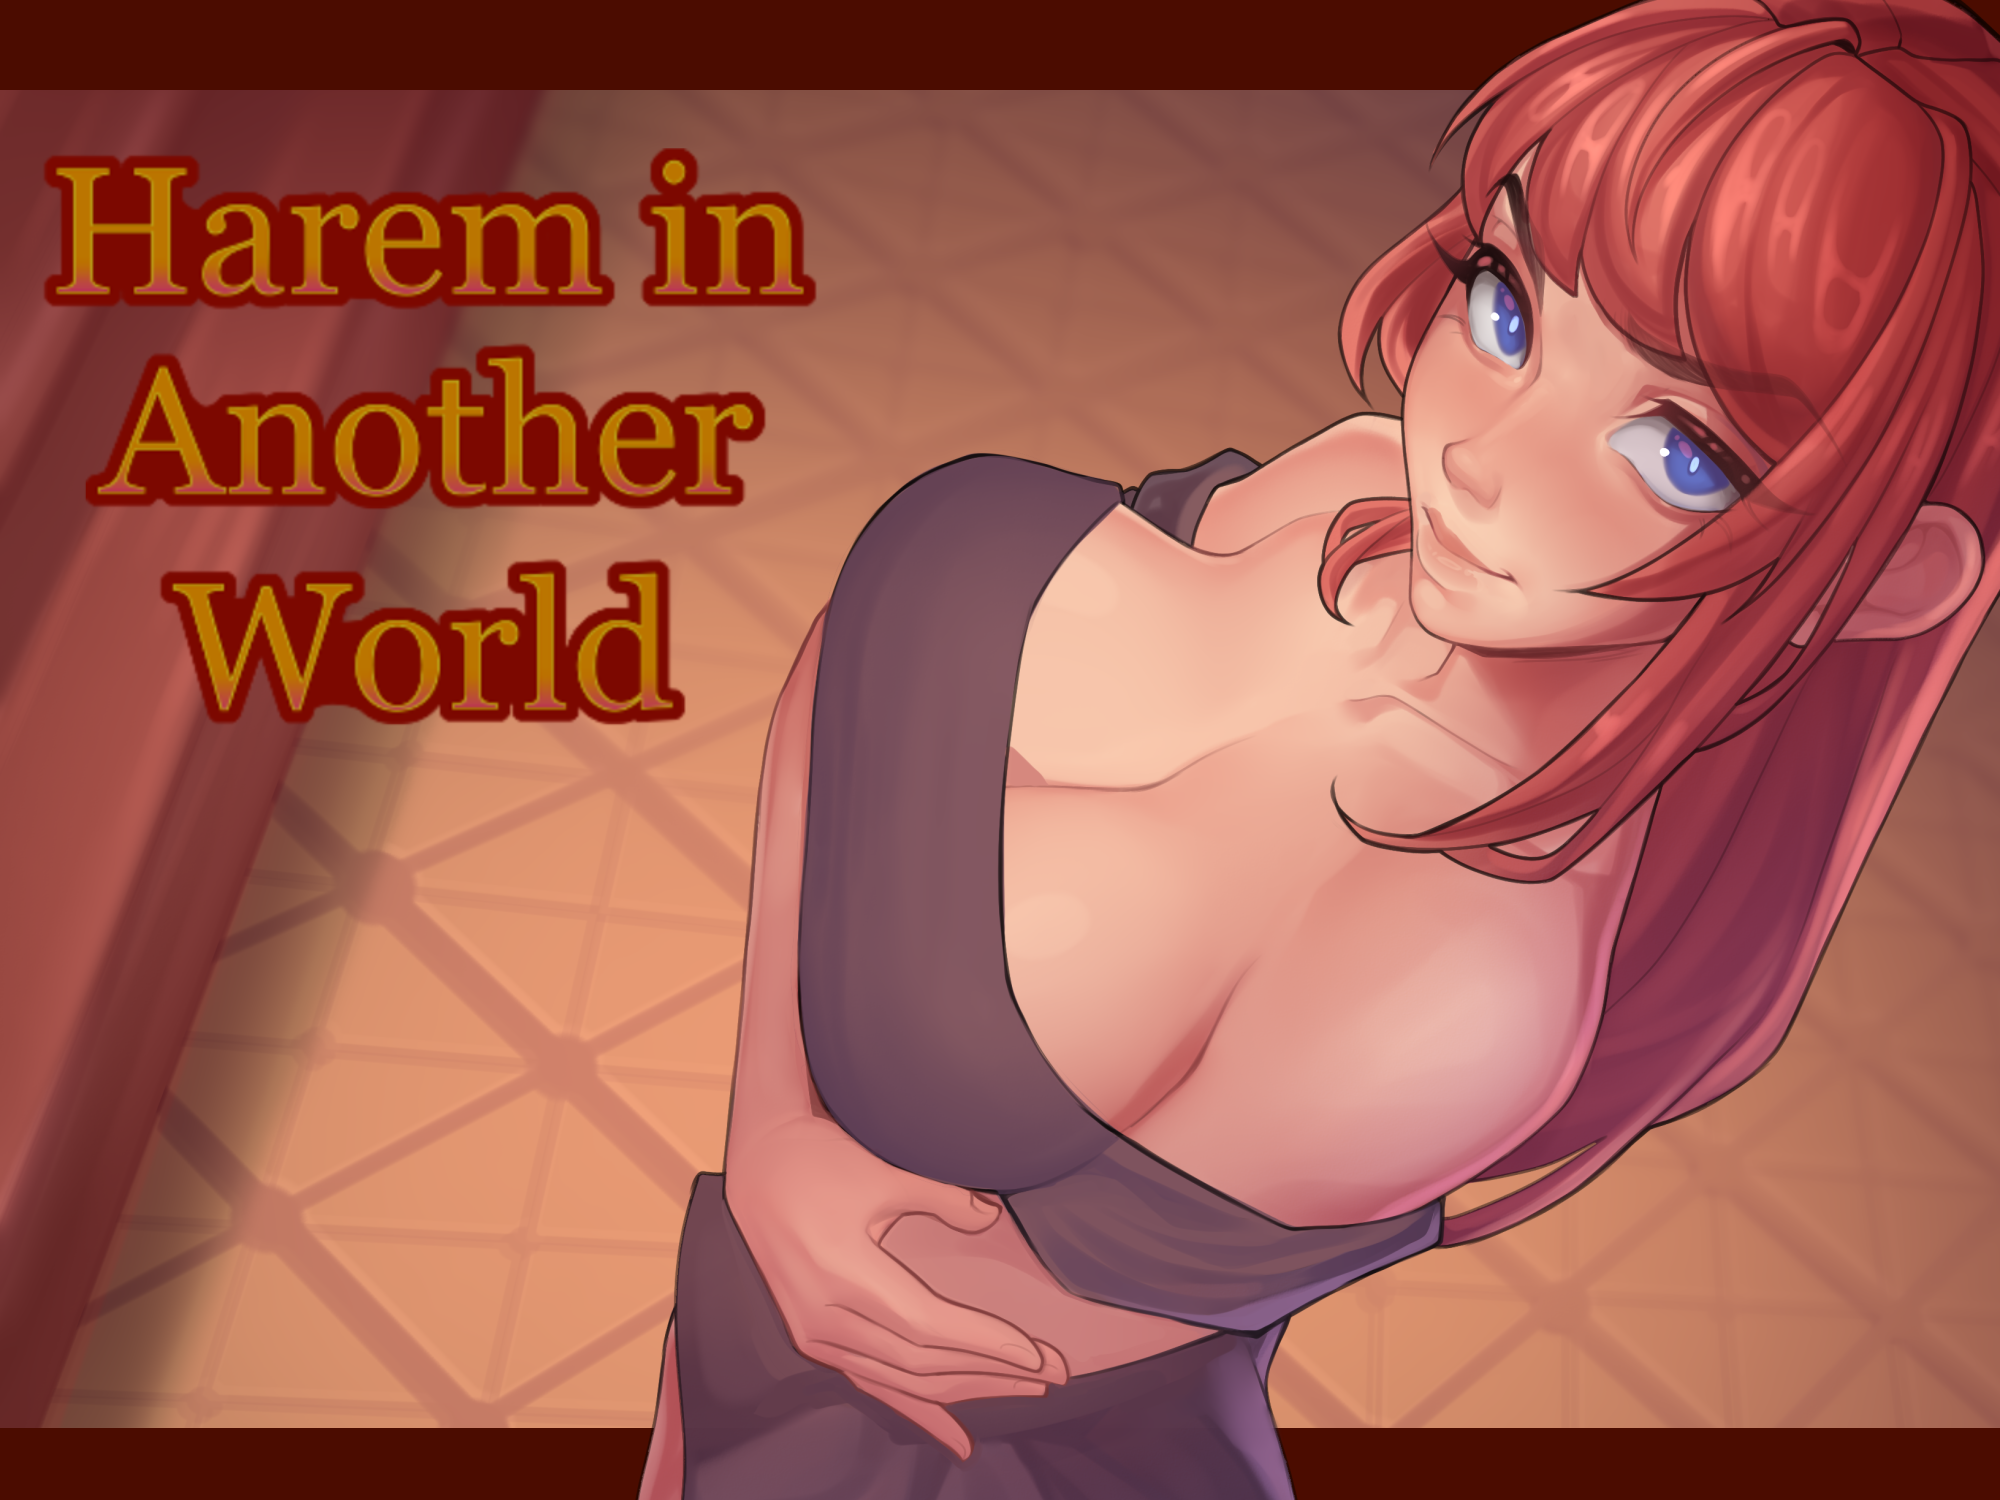 Anime Harem Cg - Harem in Another World by JongGames